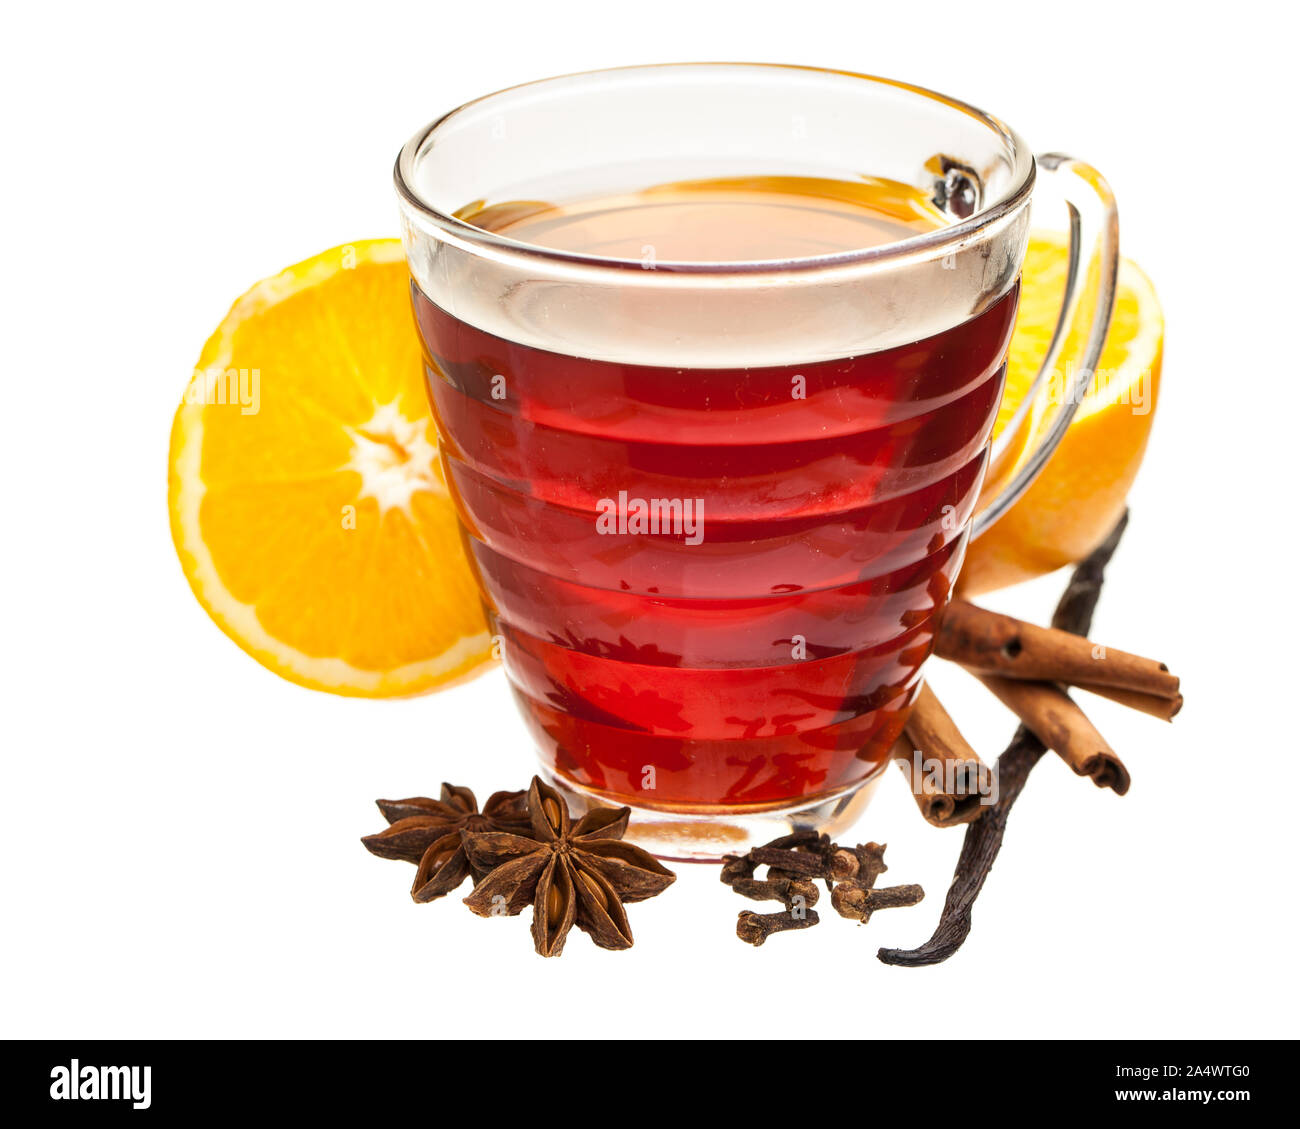 hot spiced wine isolated on white background Stock Photo